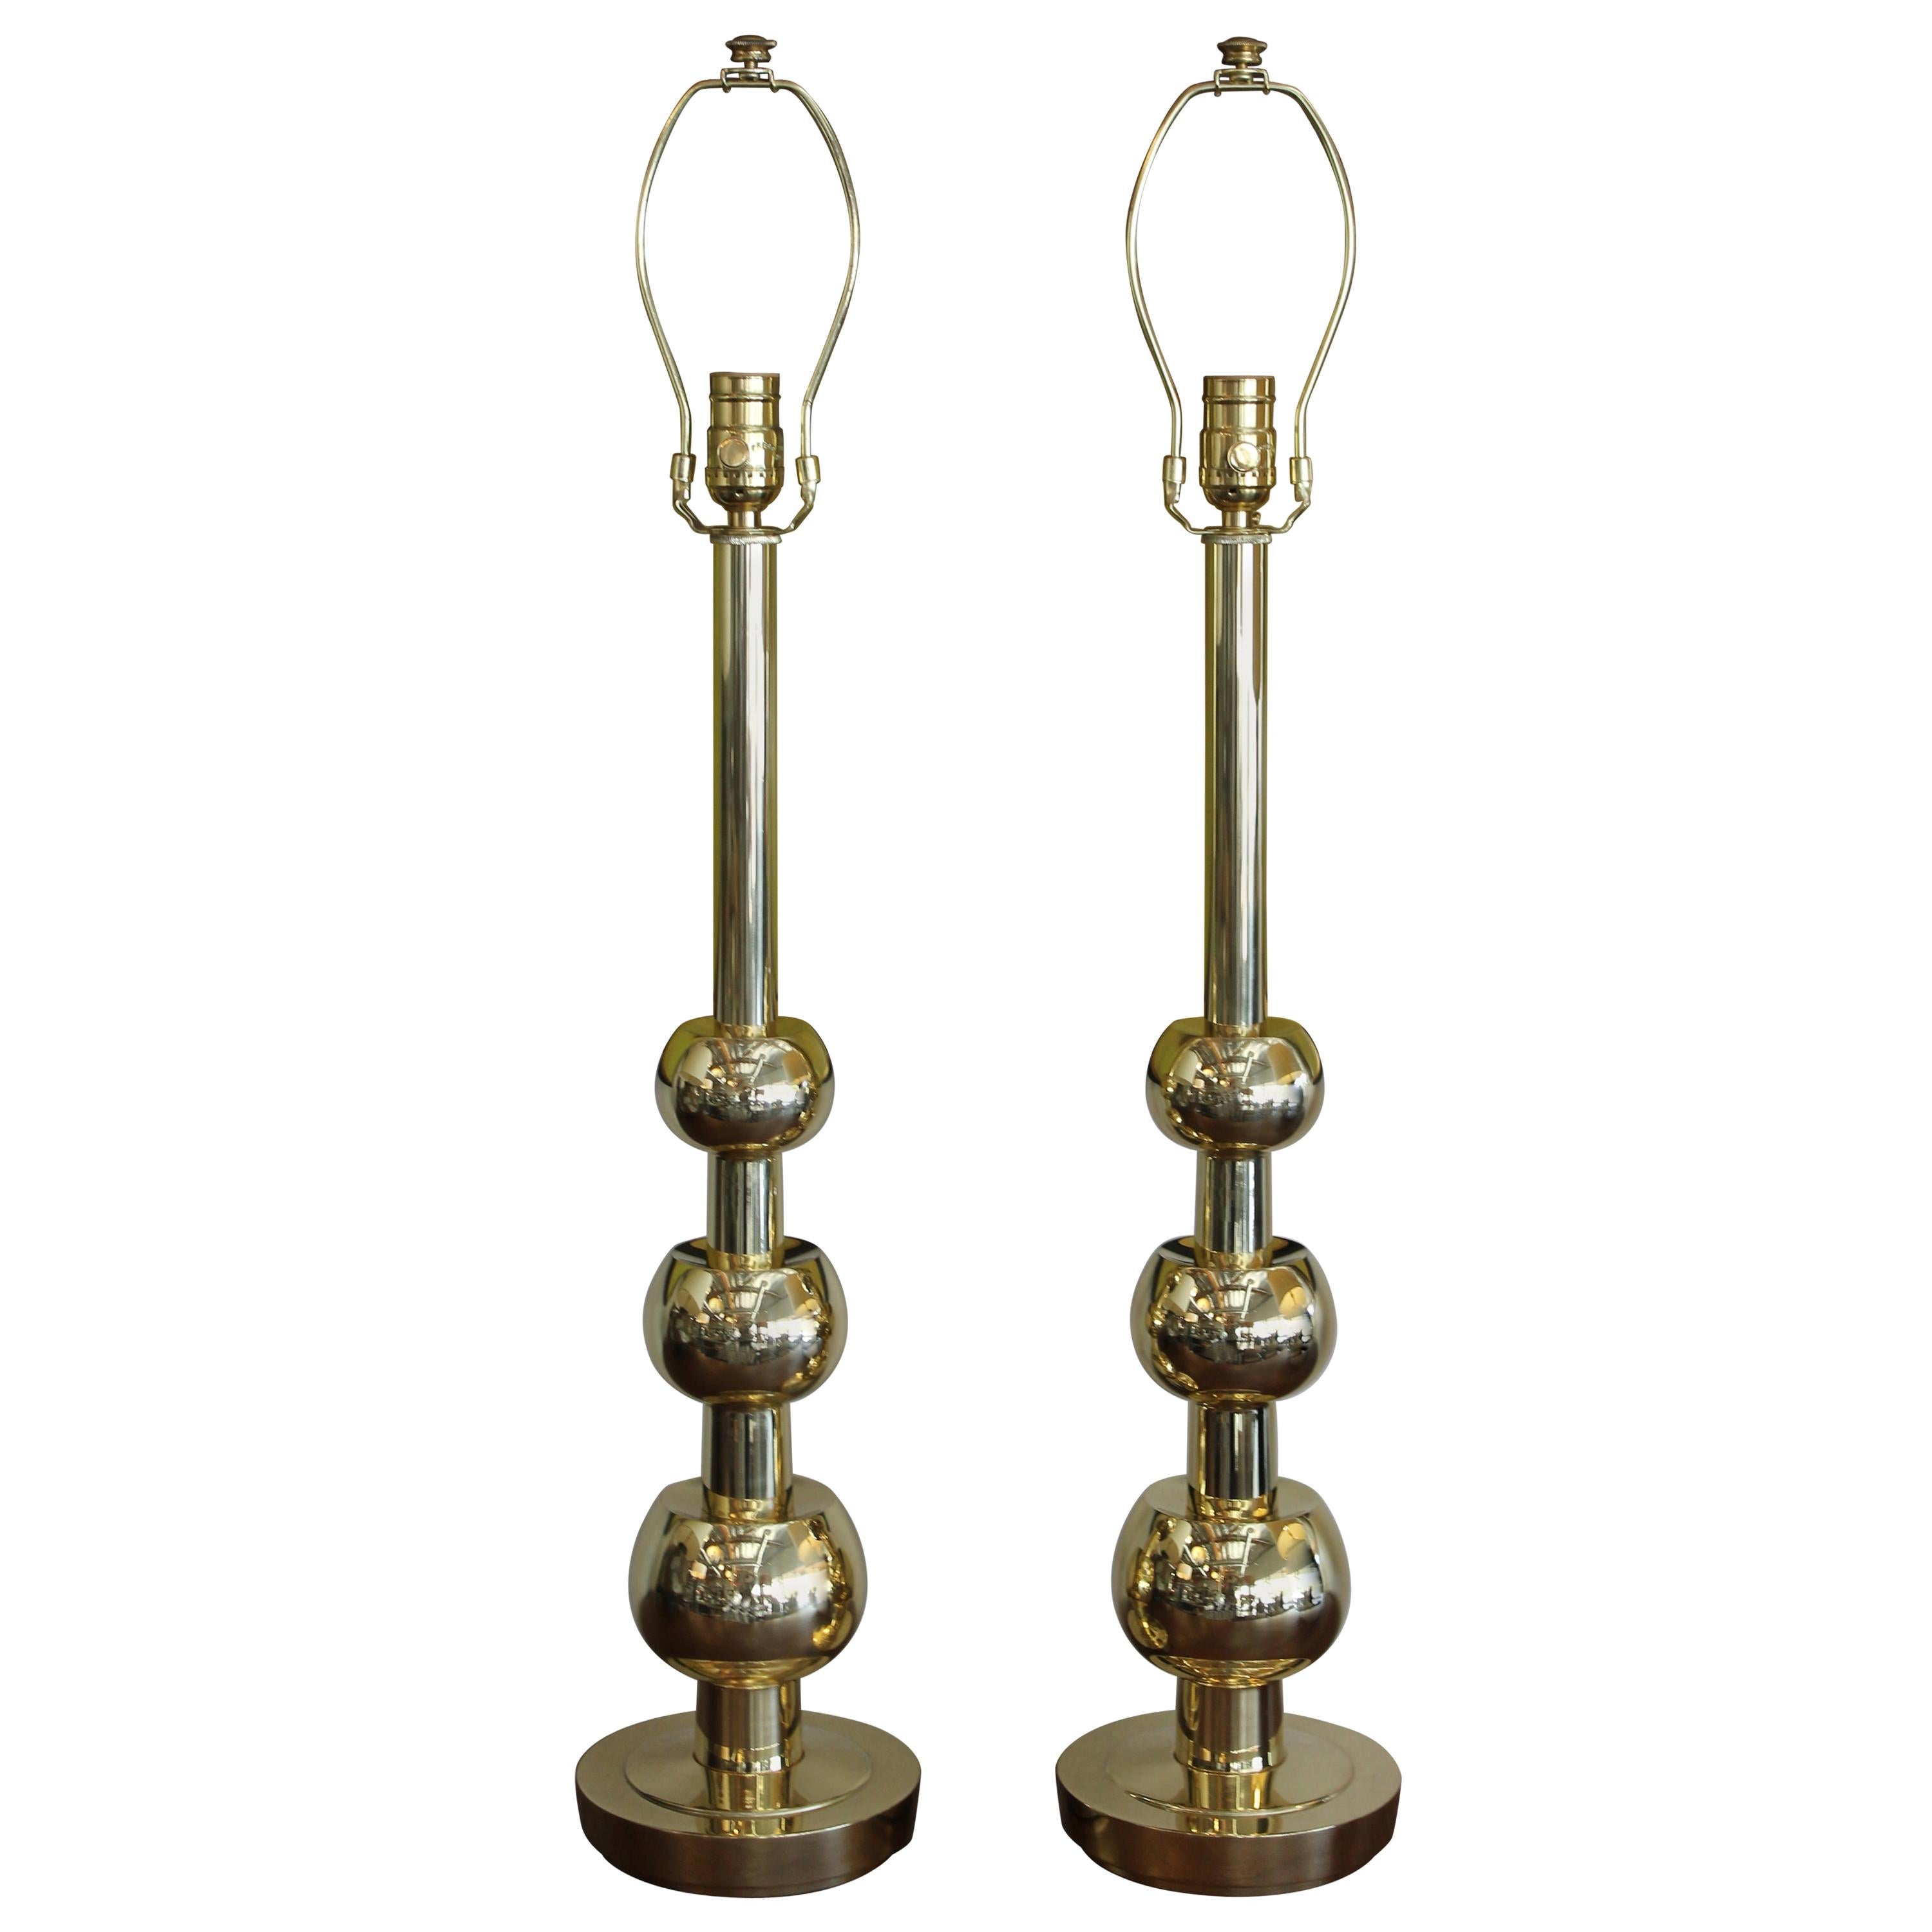 Pair of Brass Lamps by the Stiffel Lamp Company